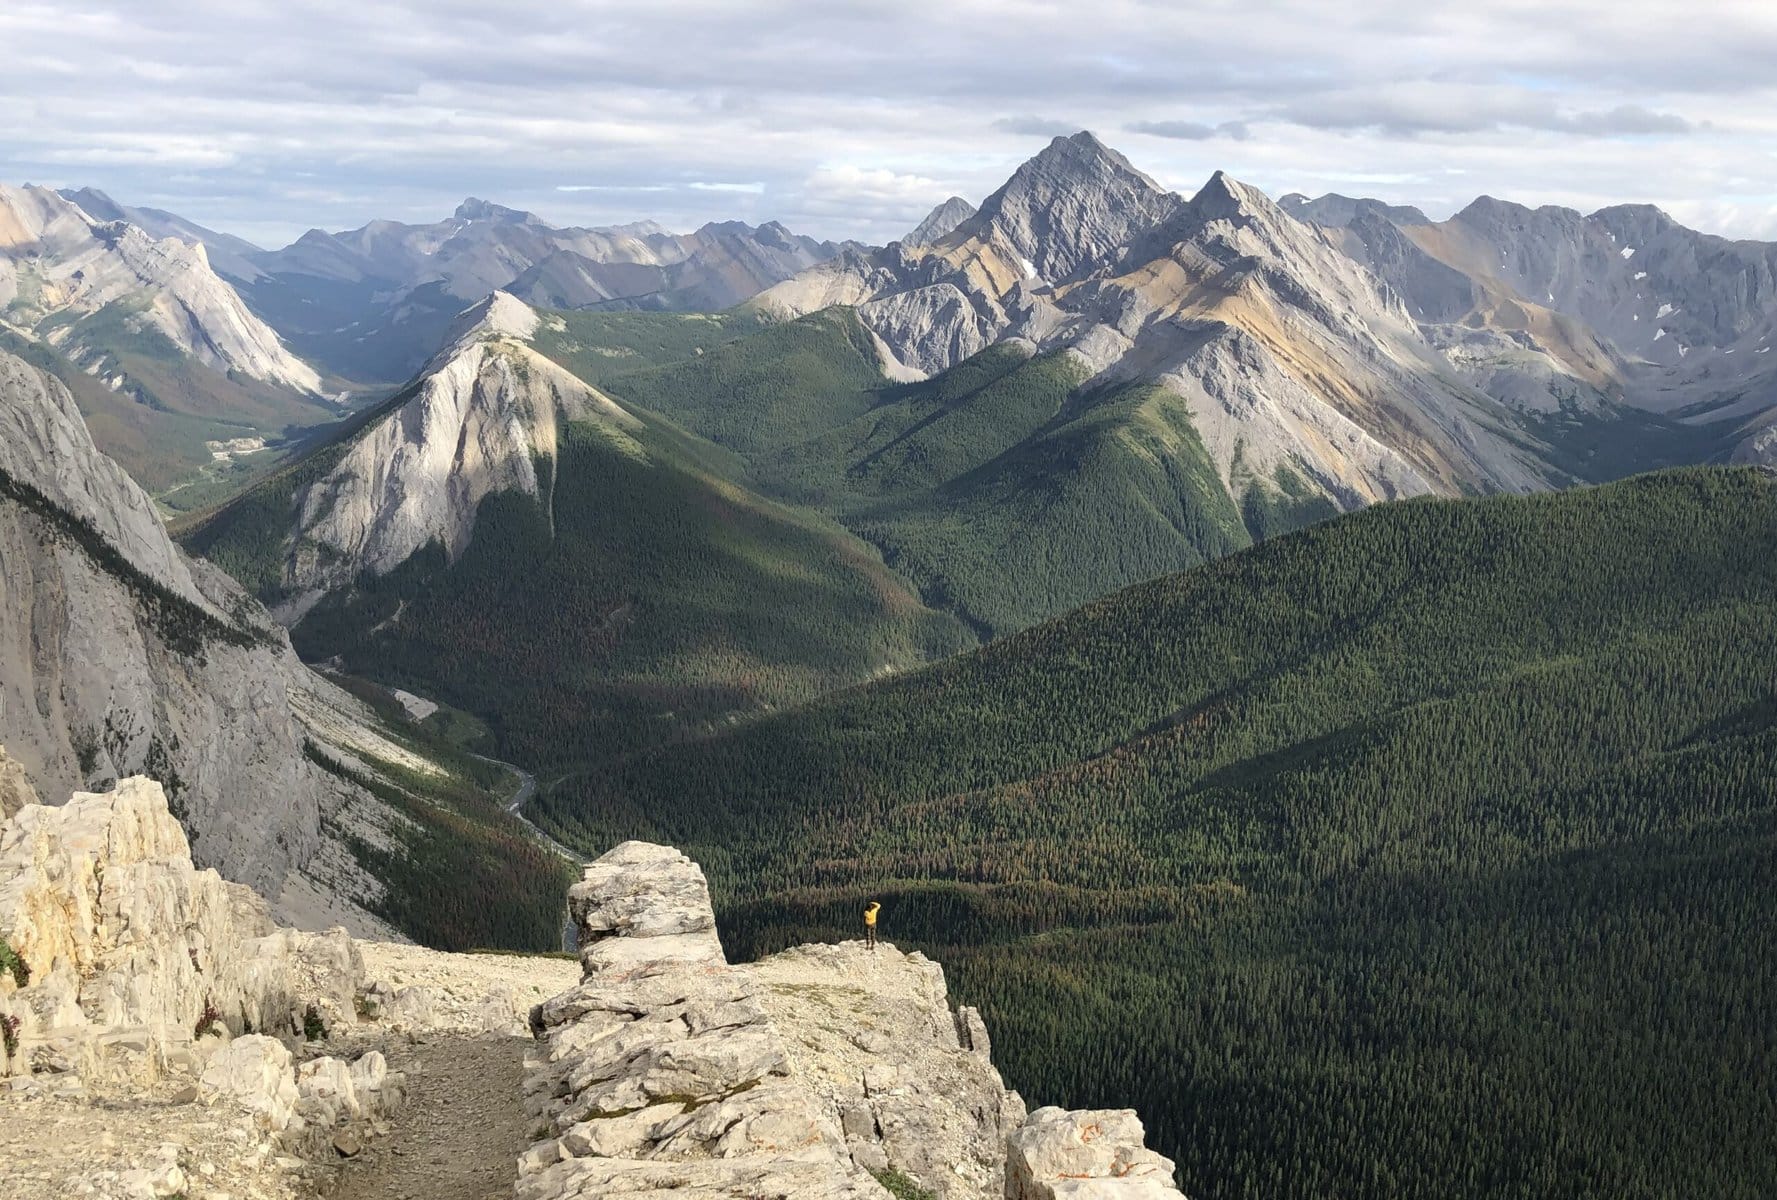 shot on the iphone. a view of the mountains and a tiny person to show how small this place makes you really feel when you summit sulphur skyline trail. one of the best hikes in jasper national park